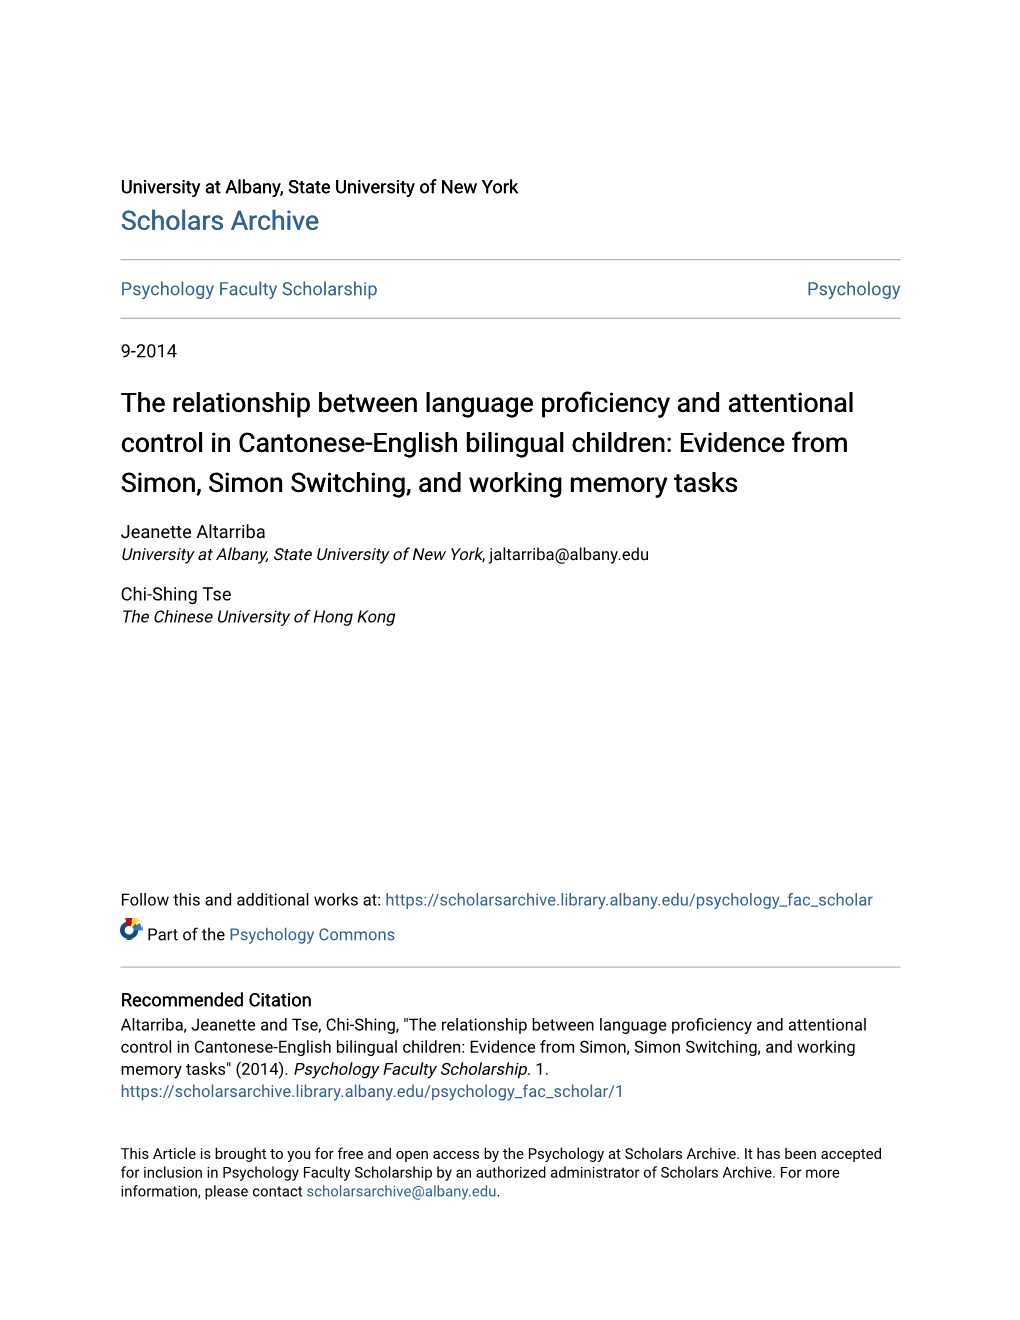 The Relationship Between Language Proficiency and Attentional Control